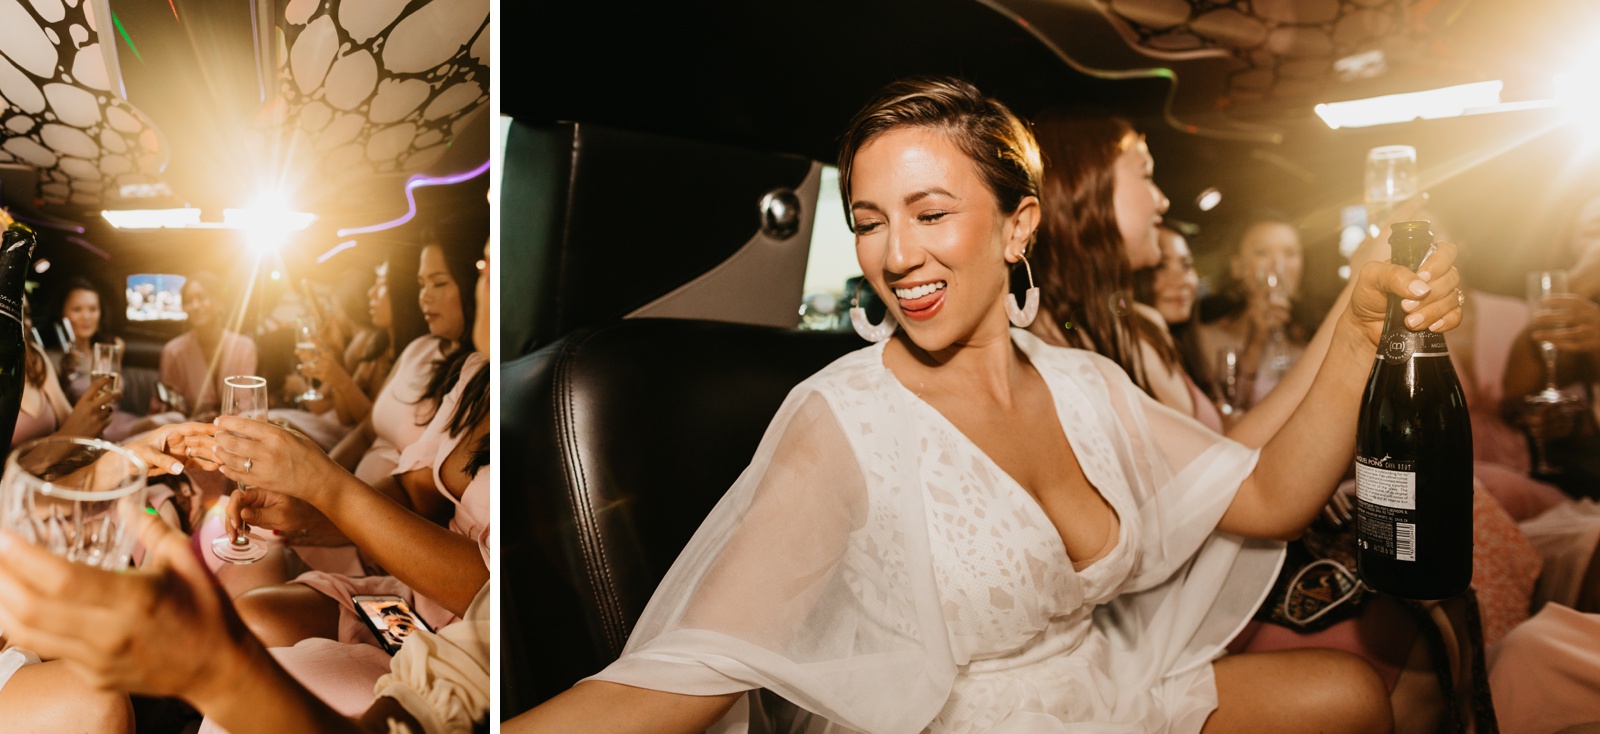 Bride with champagne in limo ride